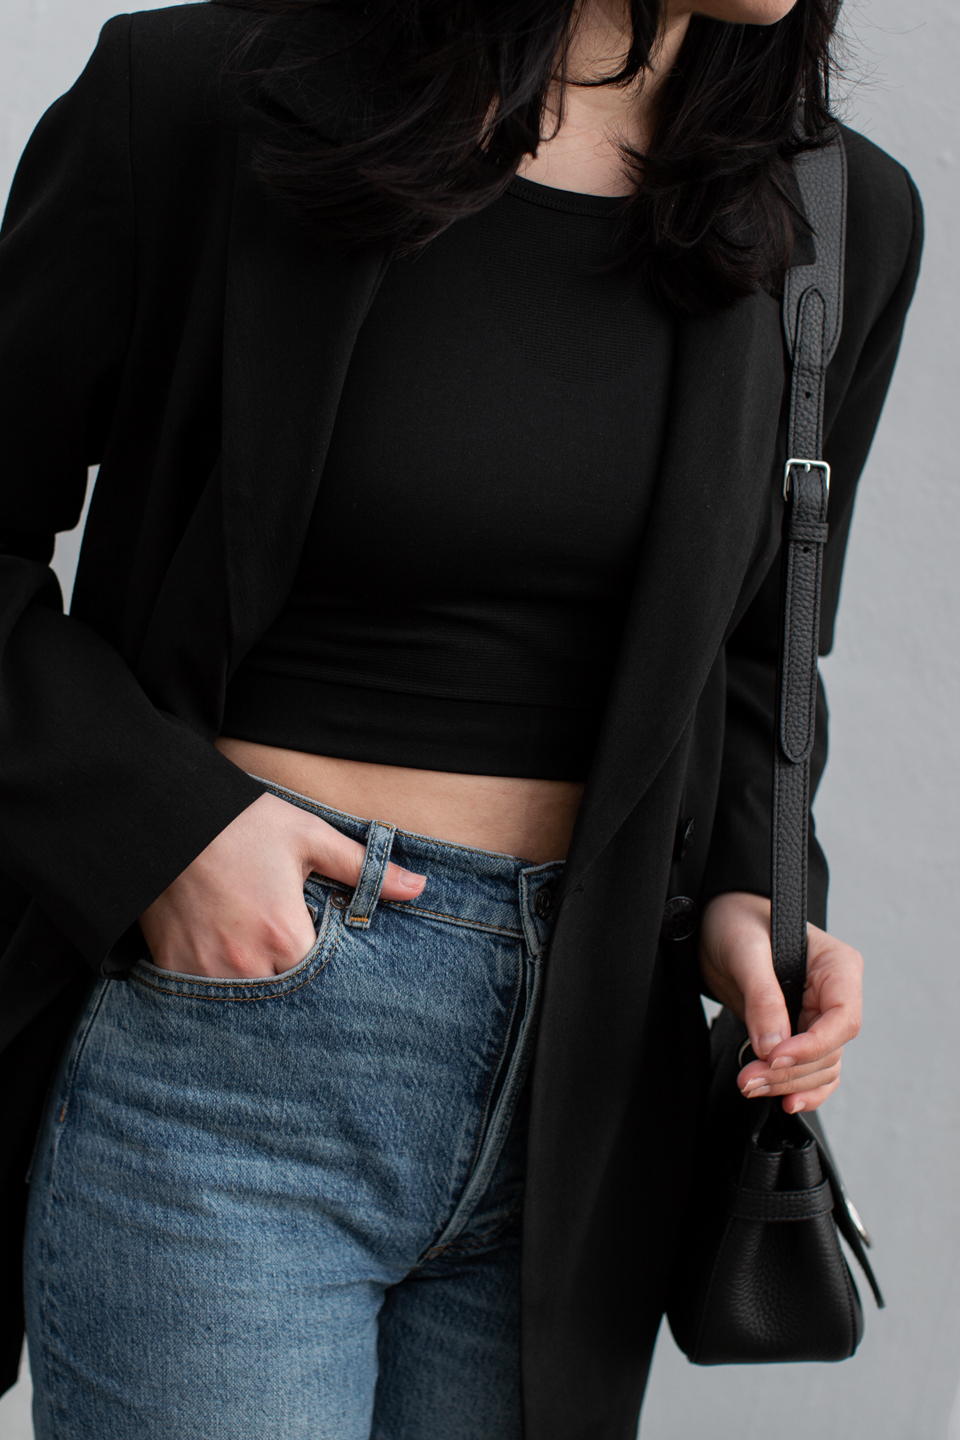 Close-up of Besma wearing Organic Basics black crop top with blue jeans and black blazer